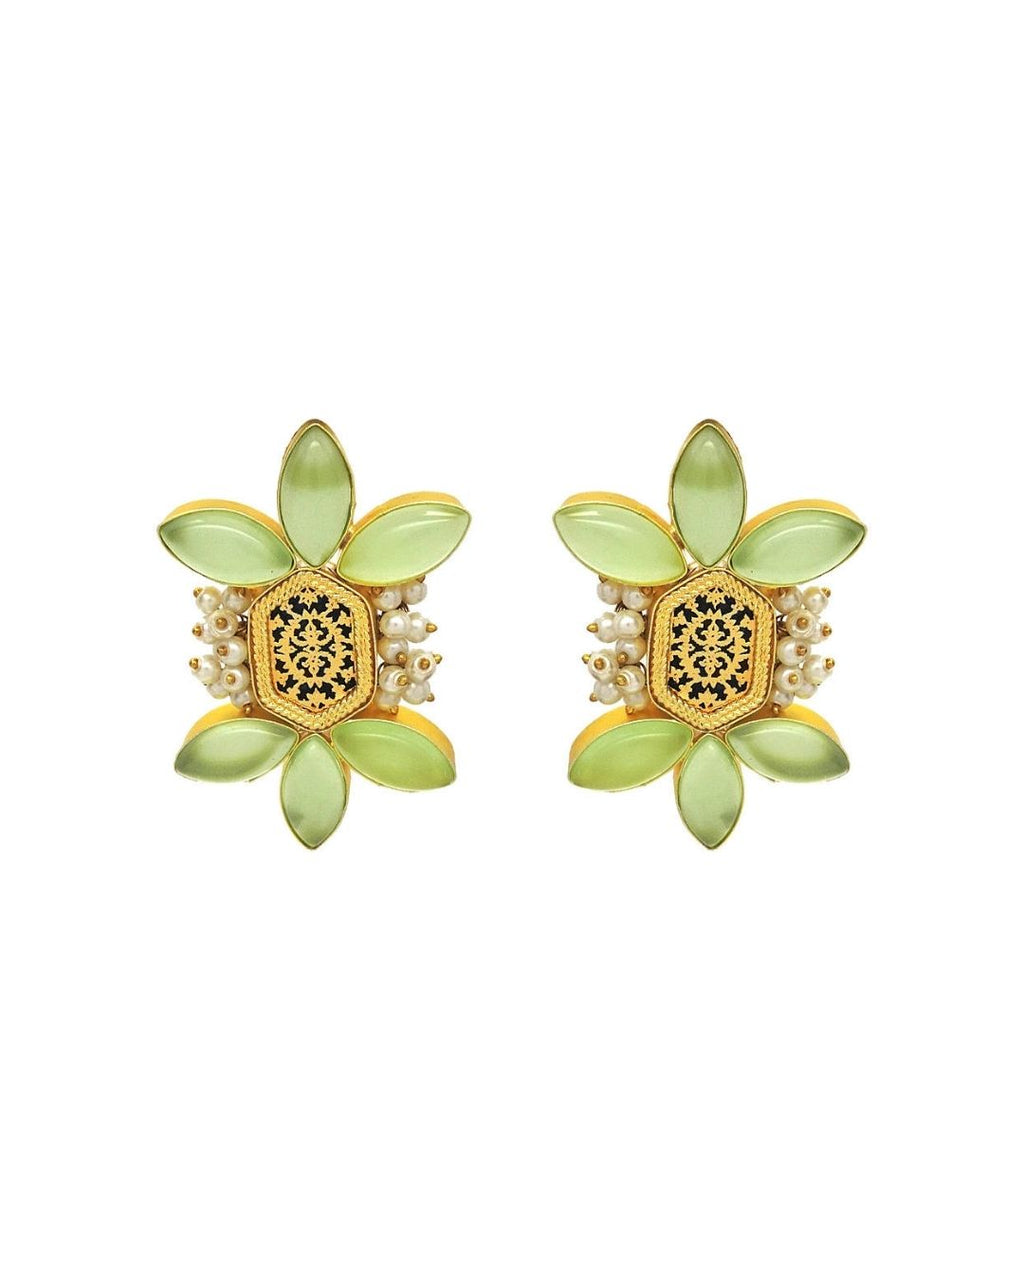 Martine Earrings in Forest - Earrings - Handcrafted Jewellery - Made in India - Dubai Jewellery, Fashion & Lifestyle - Dori